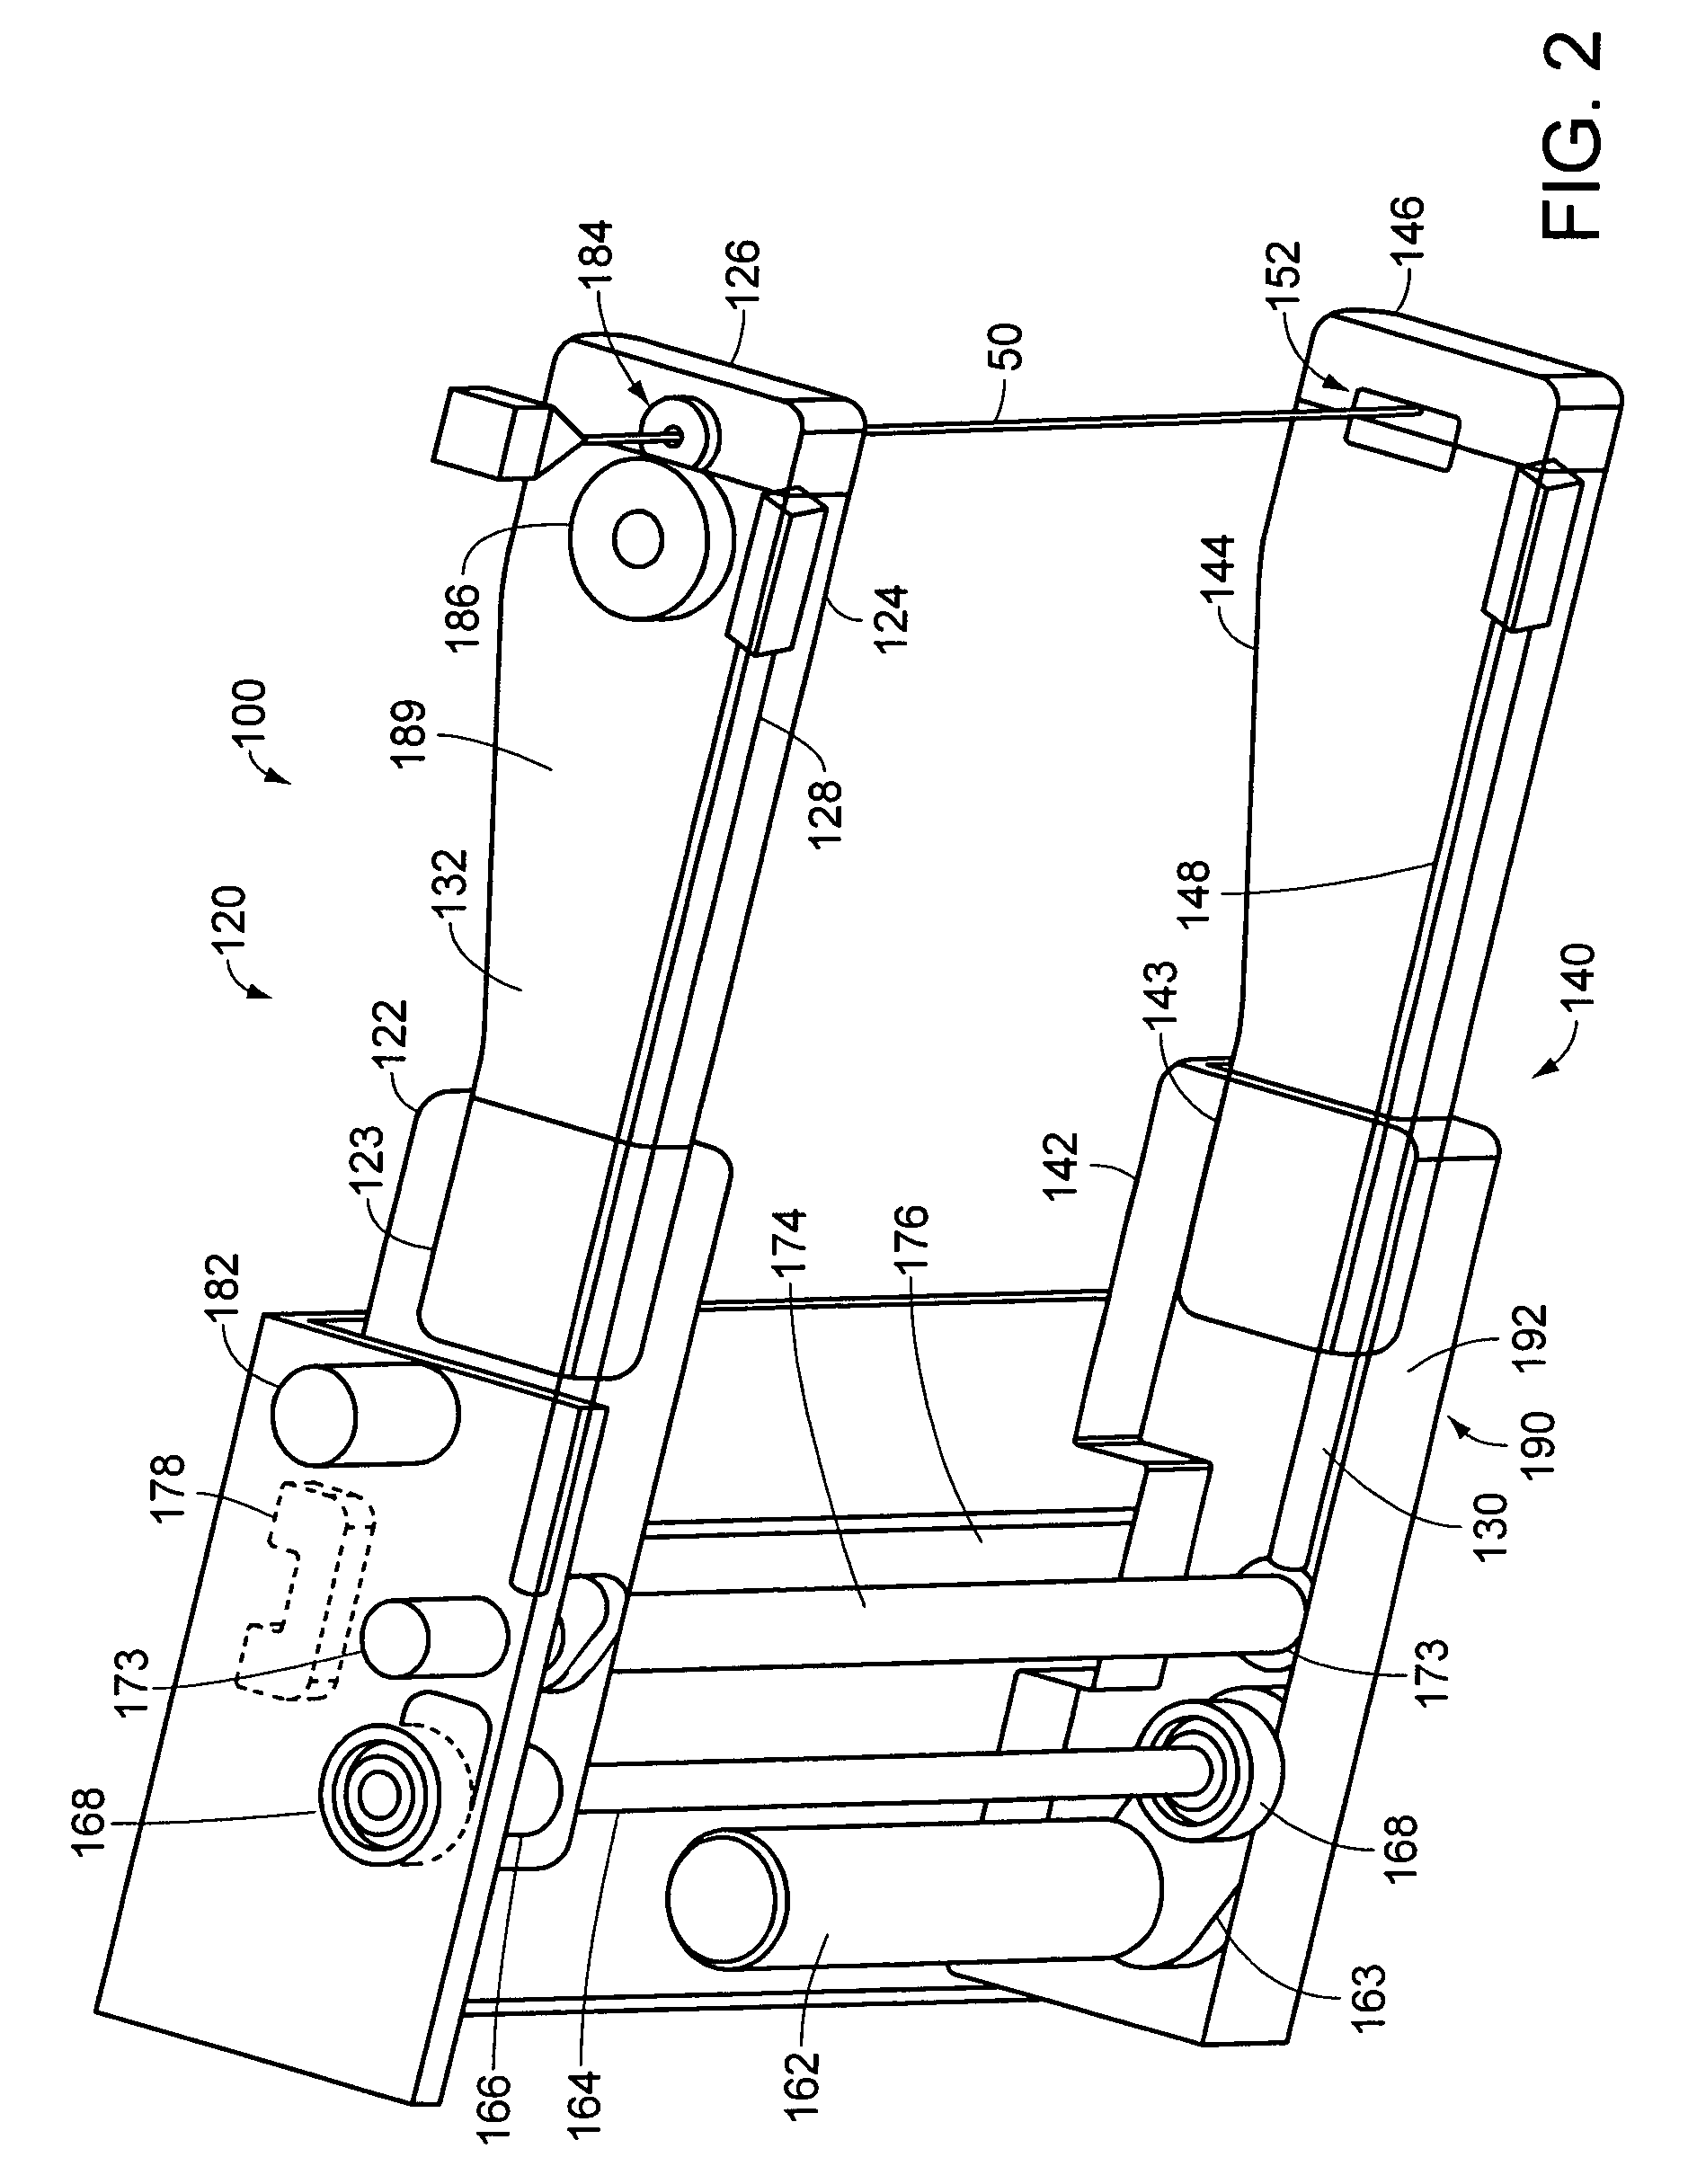 Controllable motorized device for percutaneous needle placement in soft tissue target and methods and systems related thereto